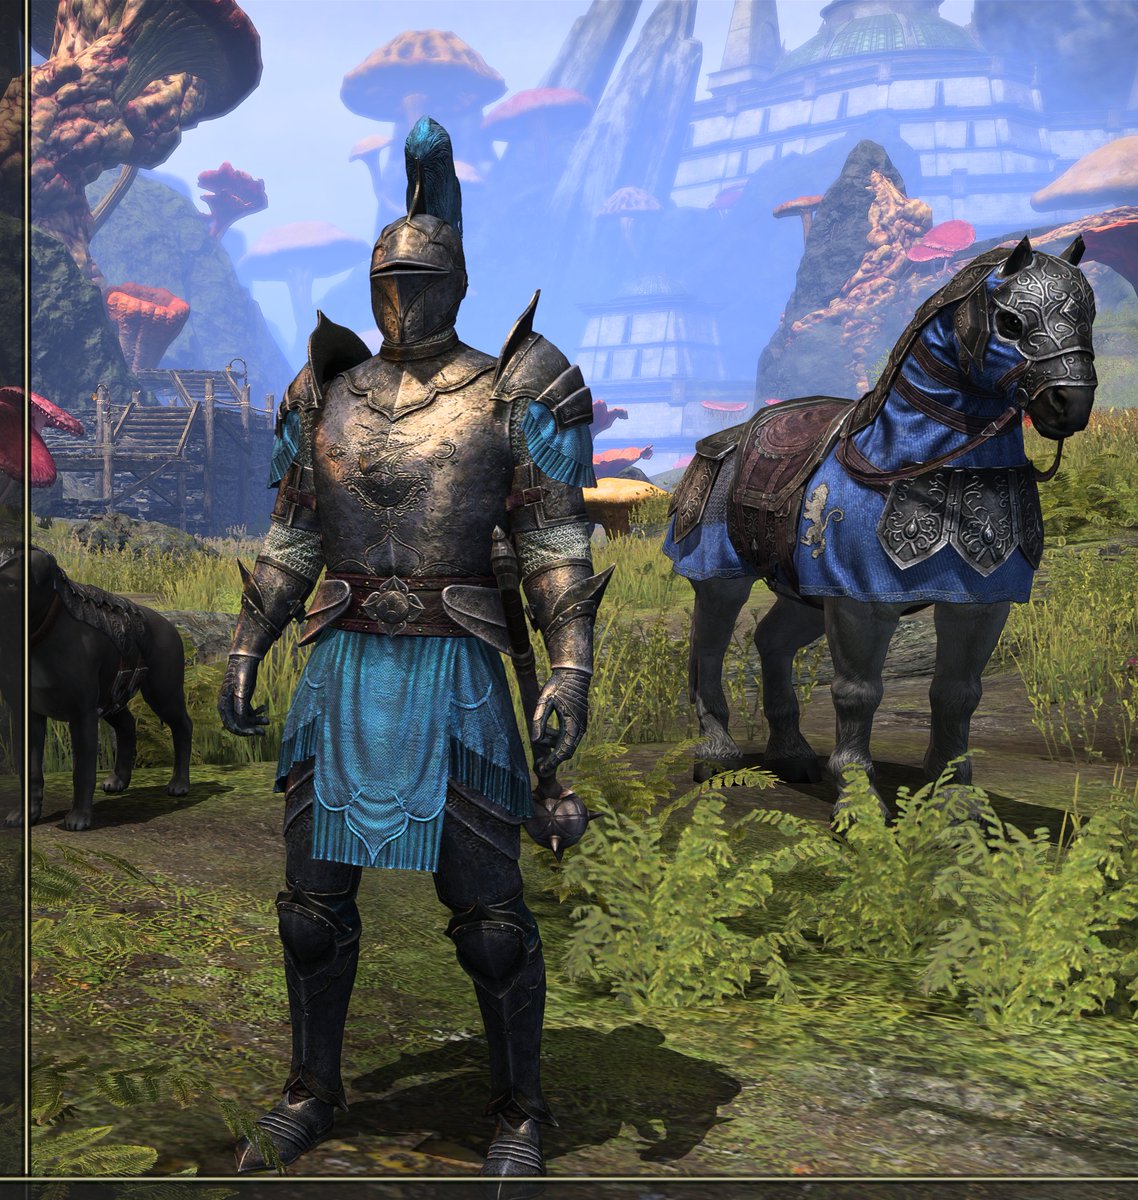 Finally find a weapon and shield that's fit very nice with this set! #ESO #ElderScrollsOnline #ESOFam